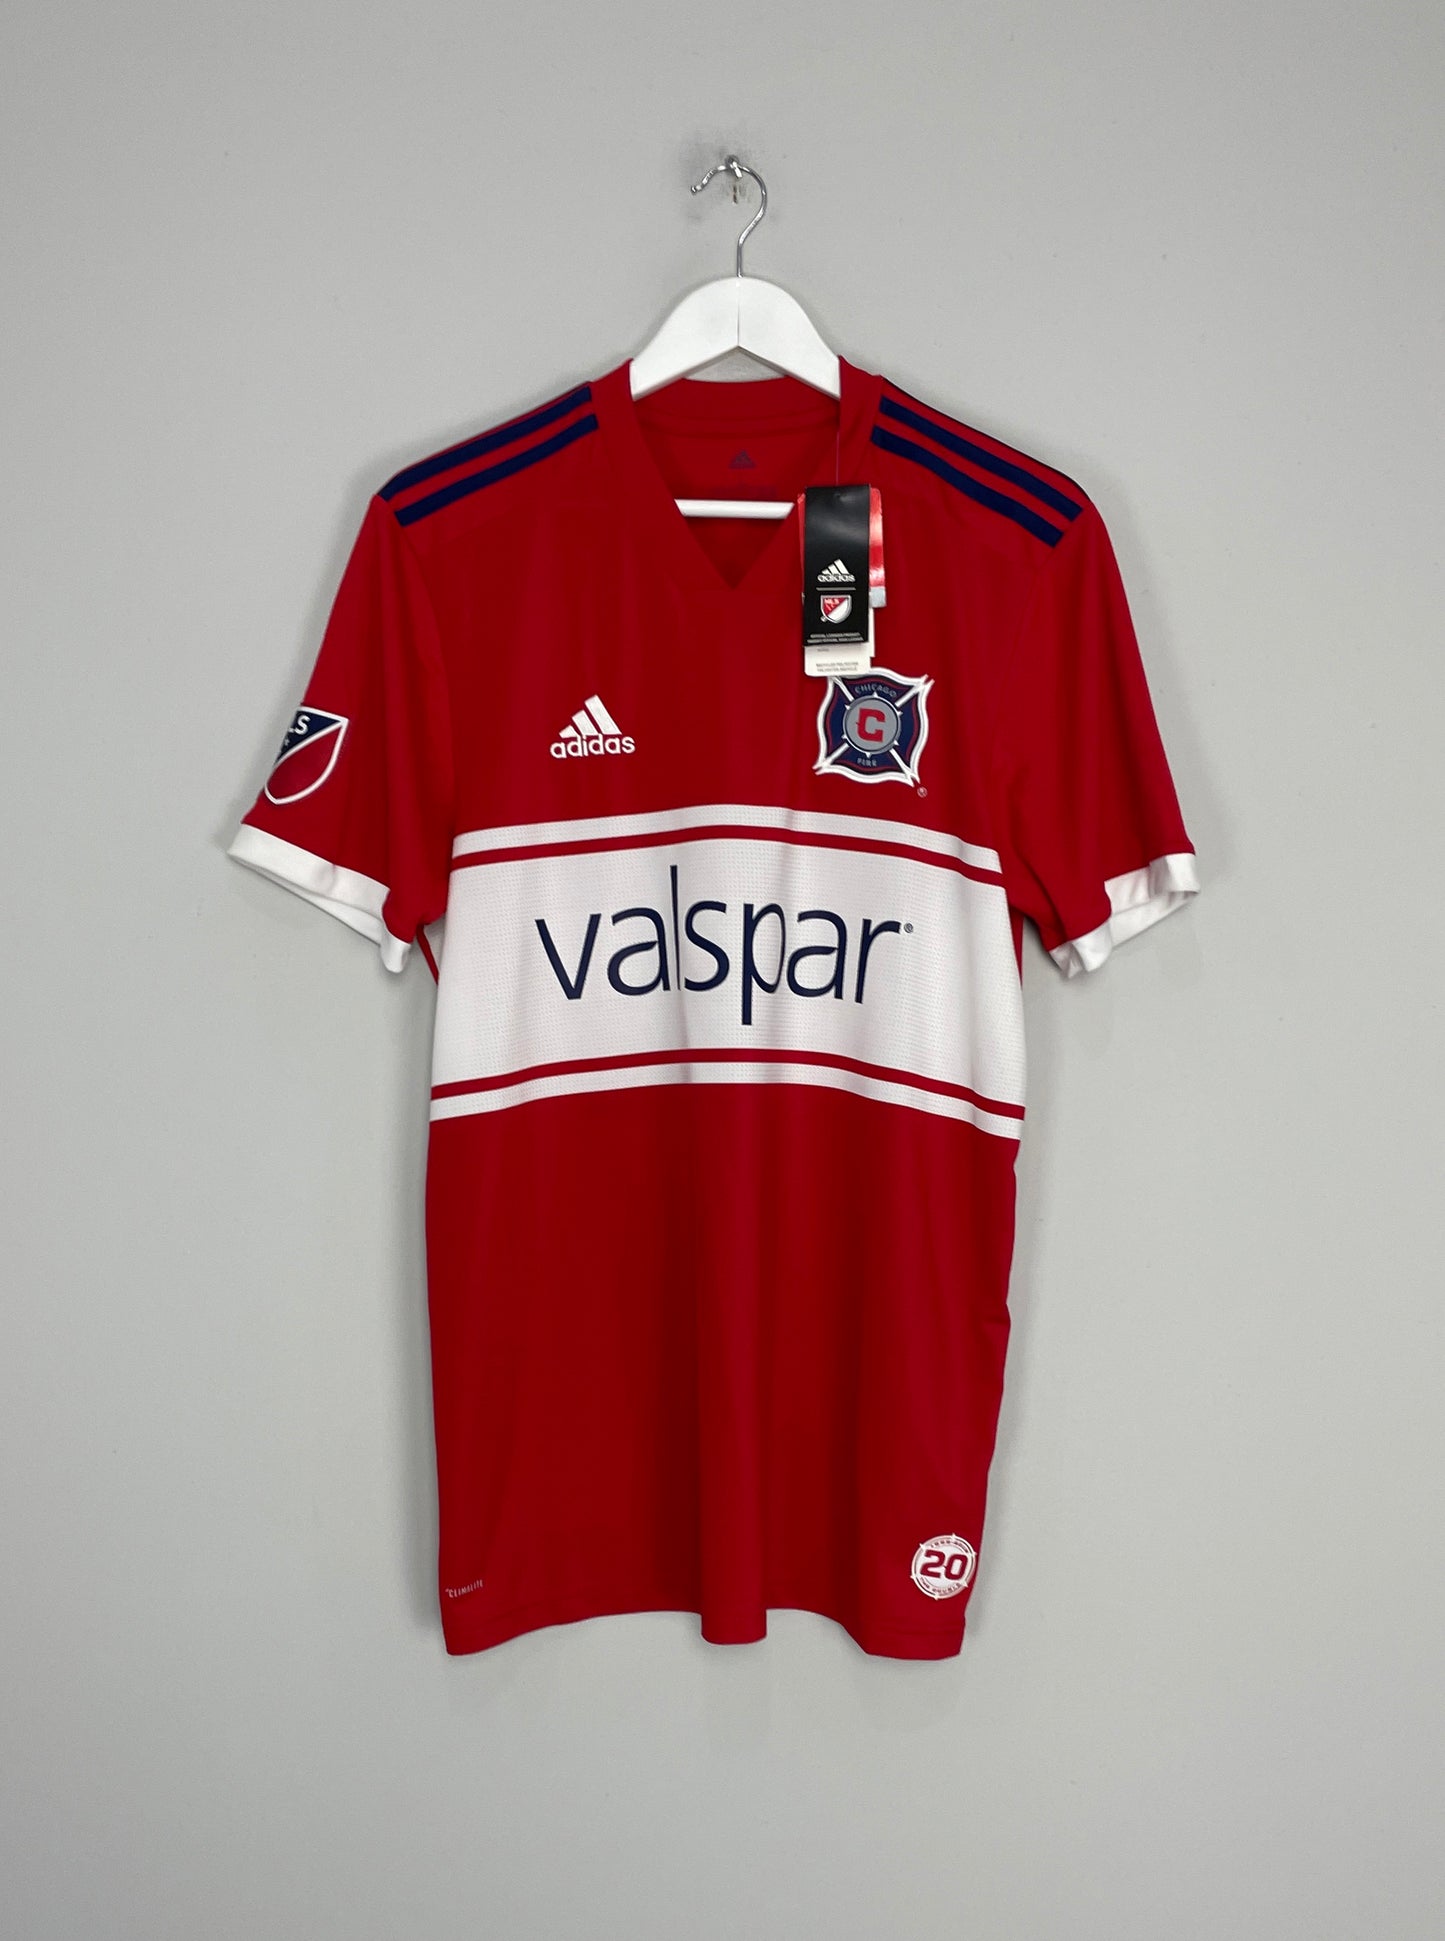 Image of the Chicago Fire shirt from the 2018/19 season